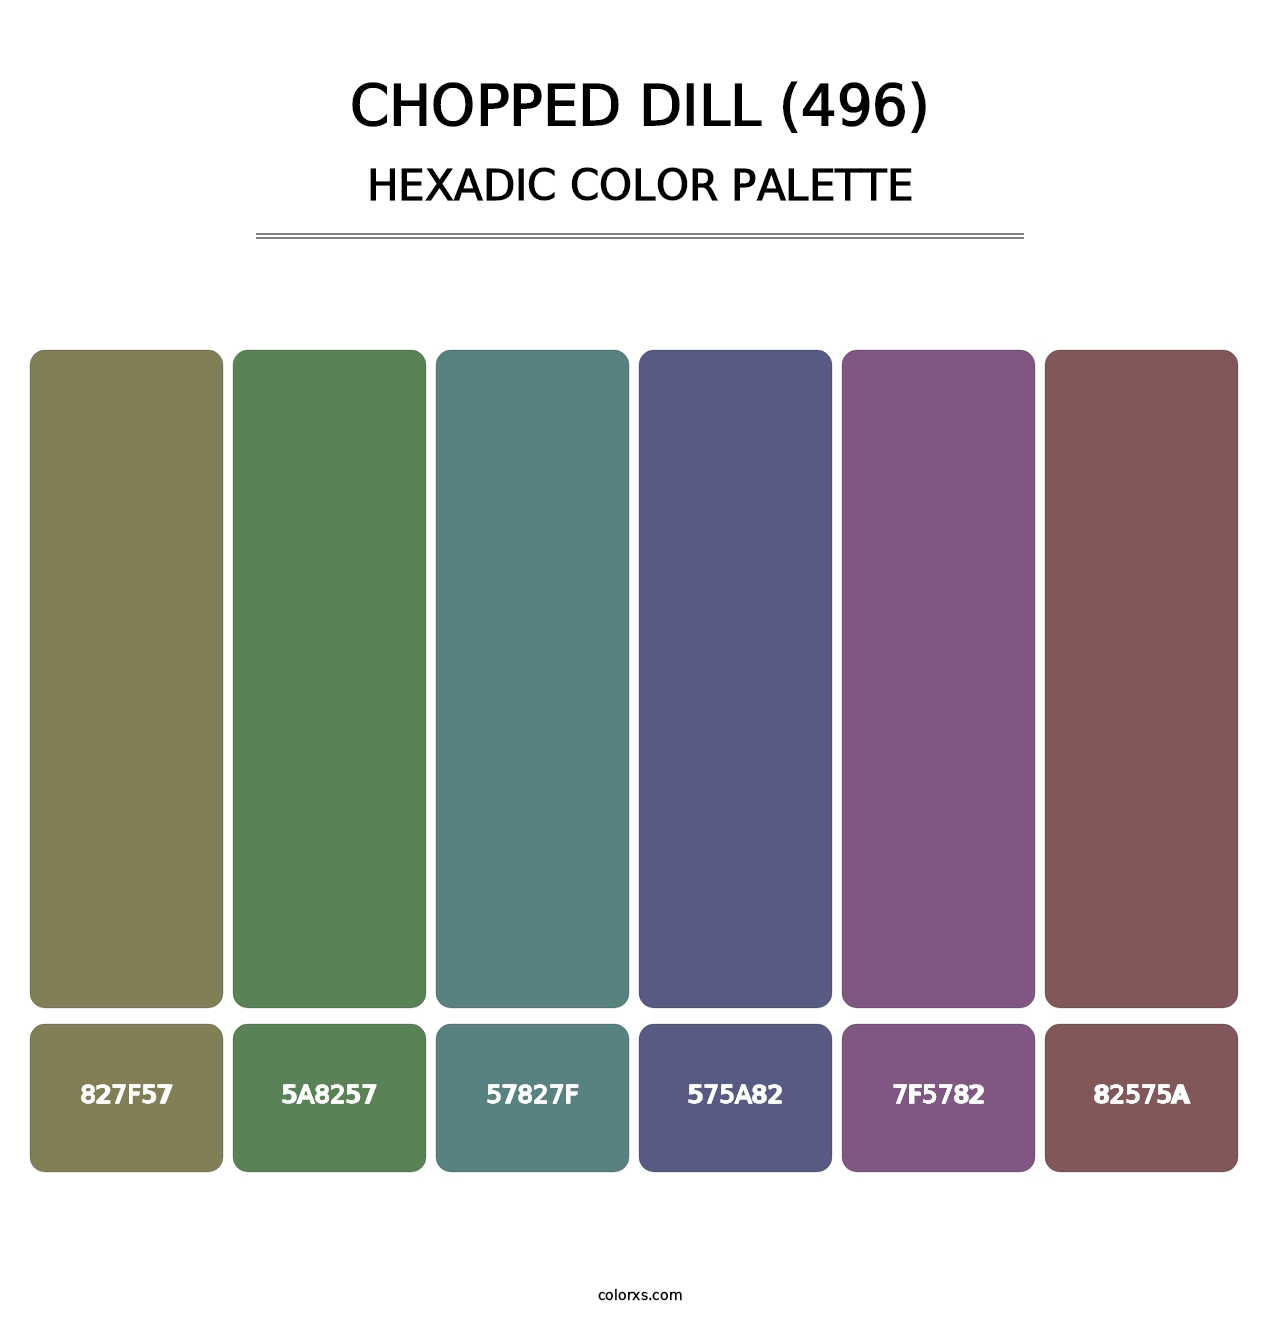 Chopped Dill (496) - Hexadic Color Palette